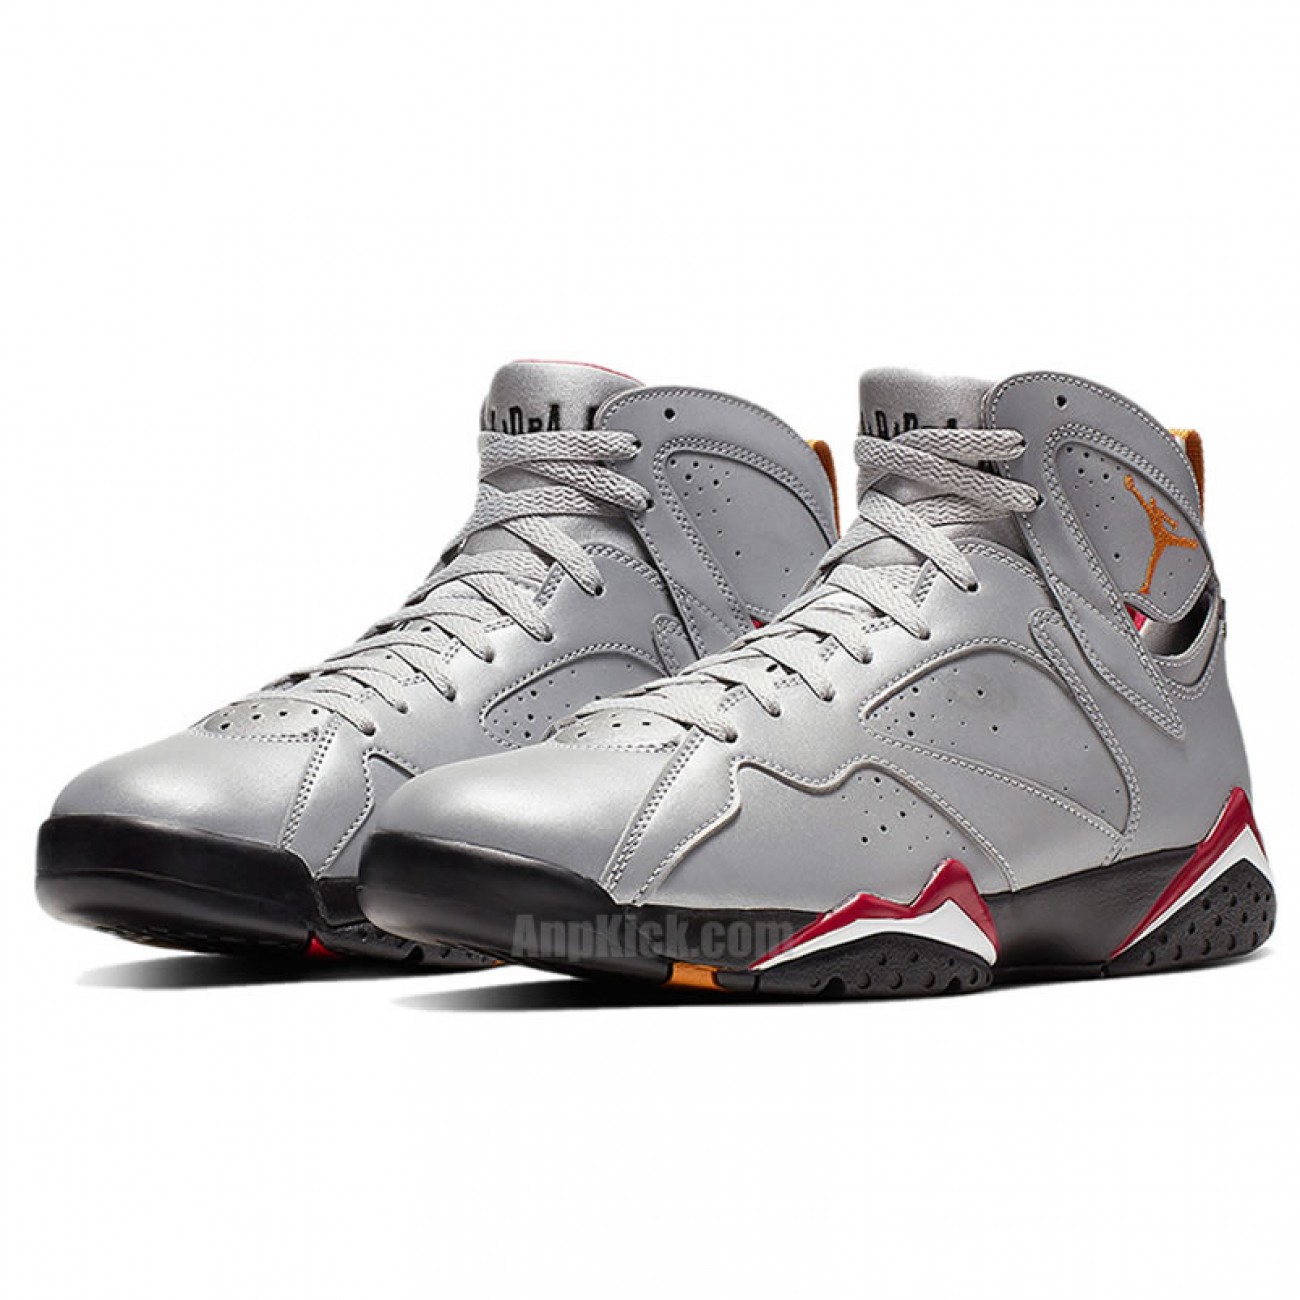 Air Jordan 7 3M Reflections Silver Of A Champion Release Date BV6281-006